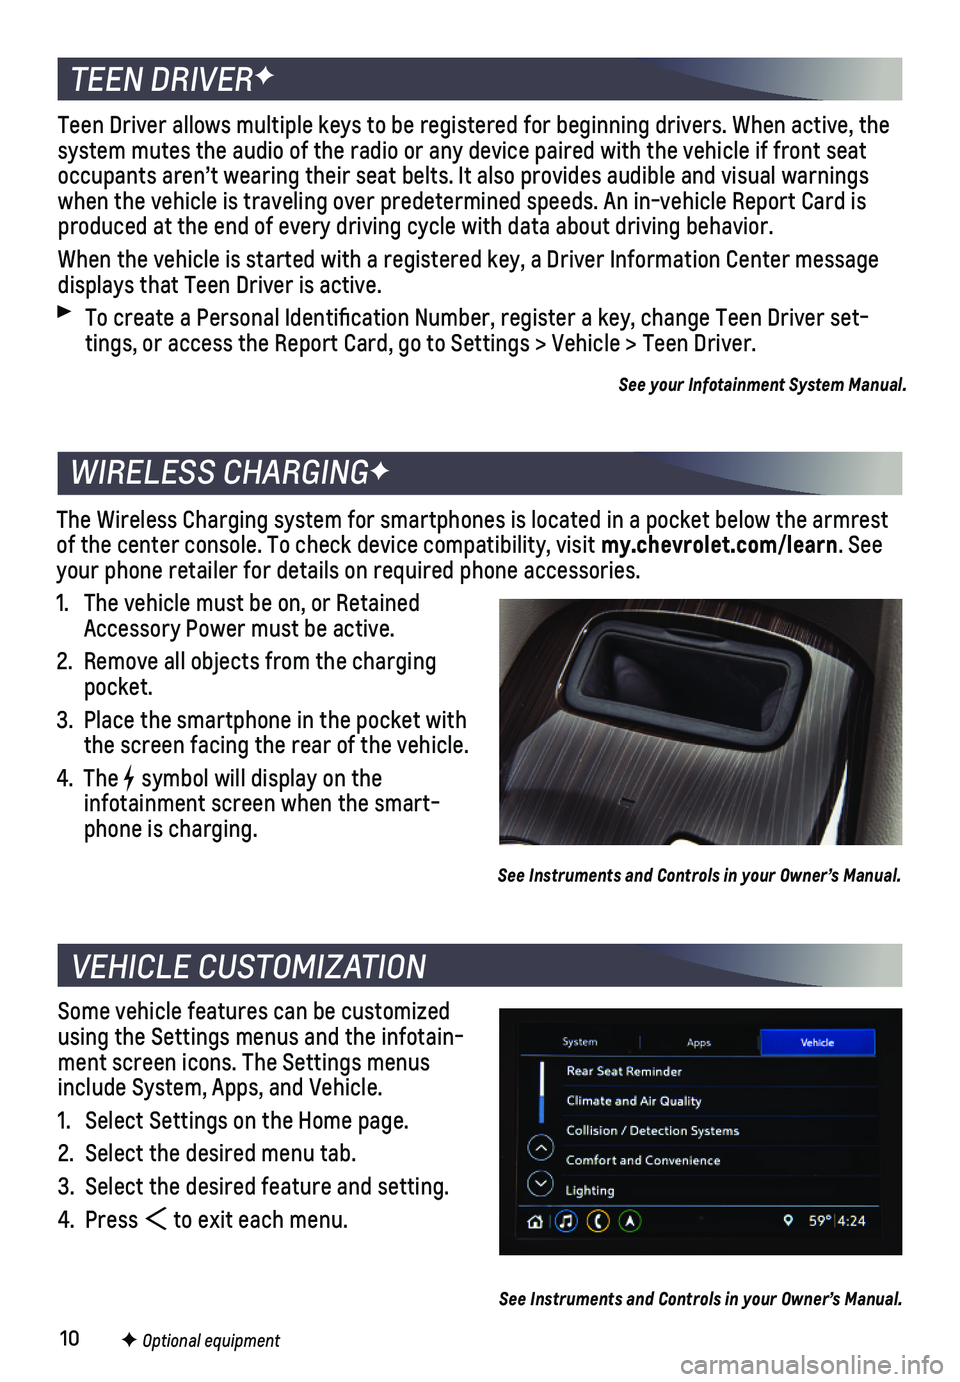 CHEVROLET MALIBU 2020  Get To Know Guide 10F Optional equipment 
Some vehicle features can be customized using the Settings menus and the infotain-ment screen icons. The Settings menus include System, Apps, and Vehicle.
1. Select Settings on